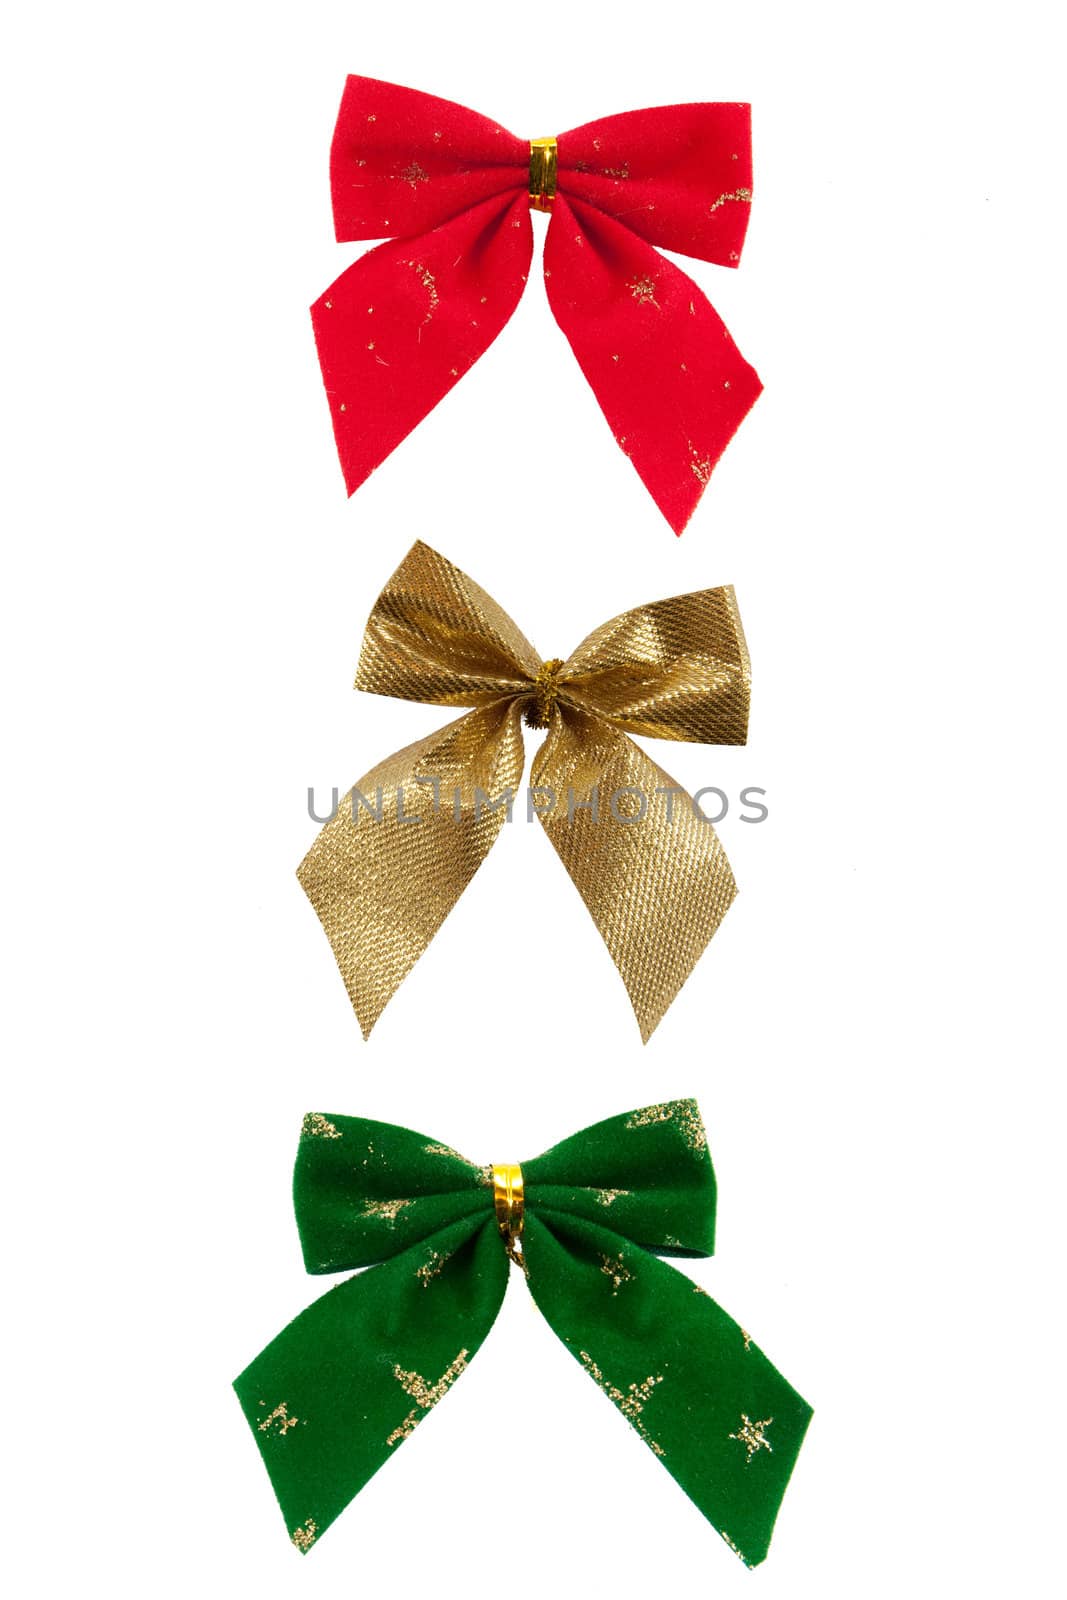 A picture of the set of three colorfull bows